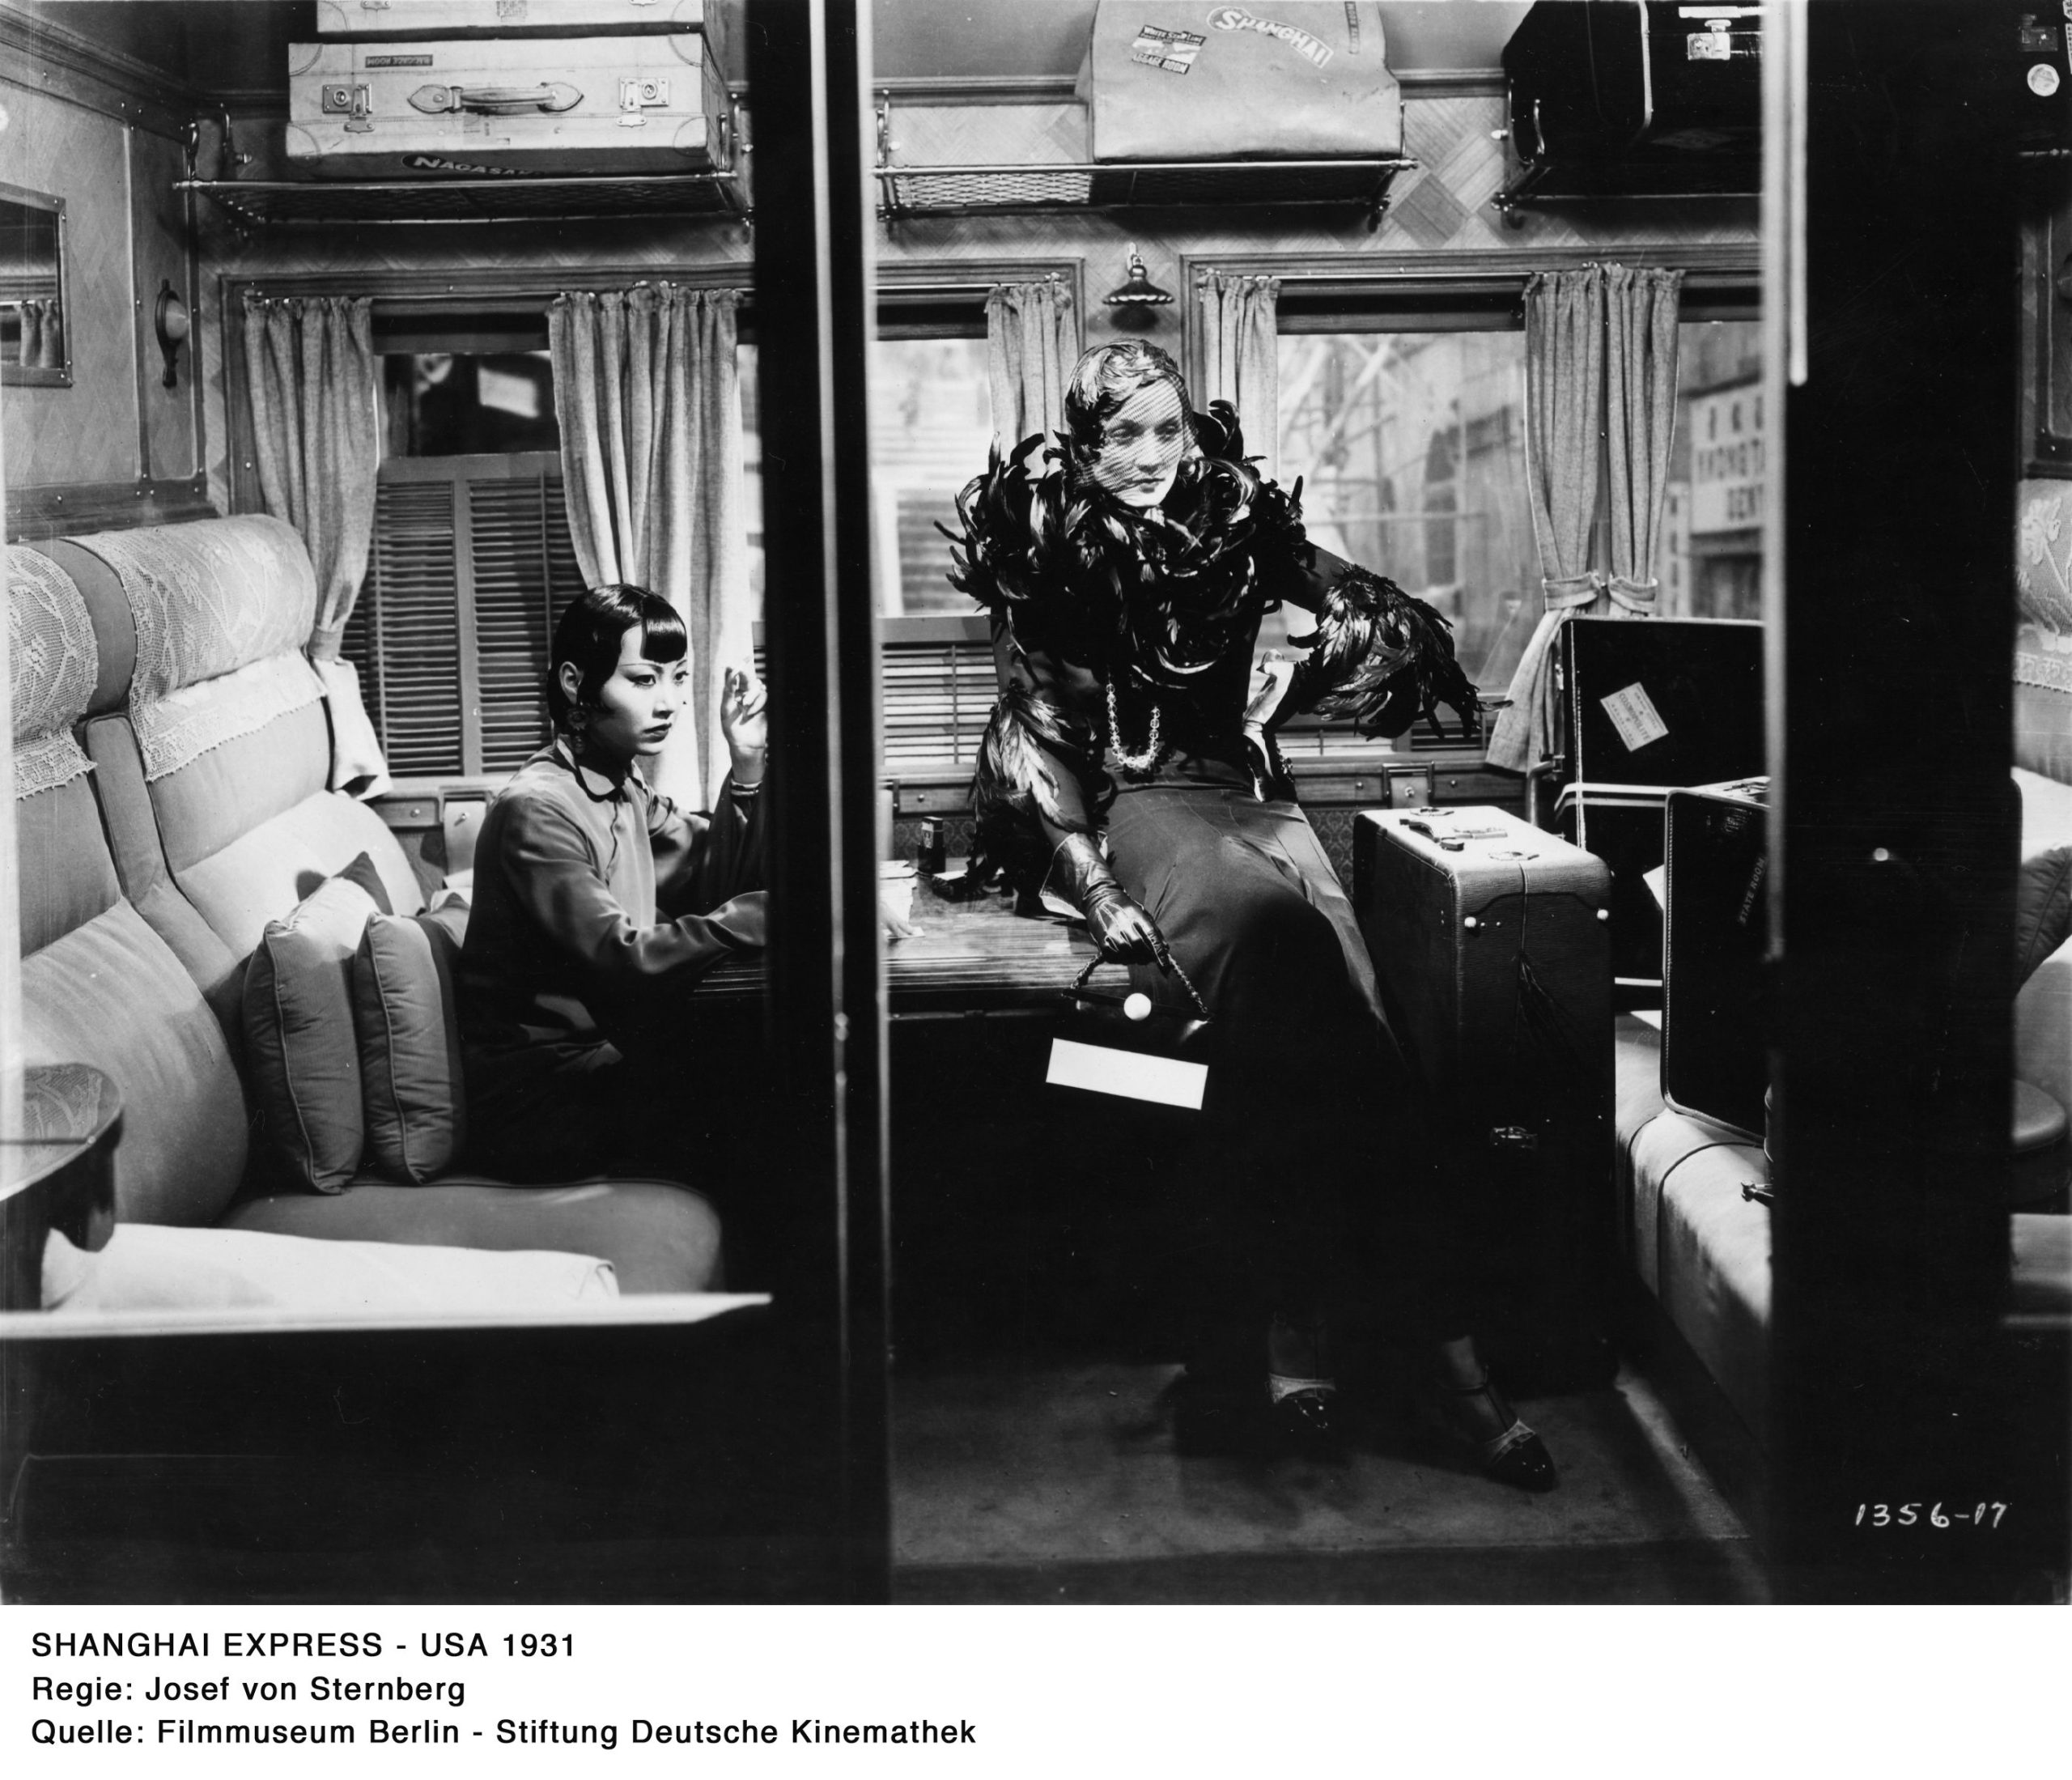 A black-white shot from the movie "Shanghai Express". Anna May Wong on the left sits in a train compartment. Another white woman with an elegant outfit leans on the table, next to her is a huge suitcase